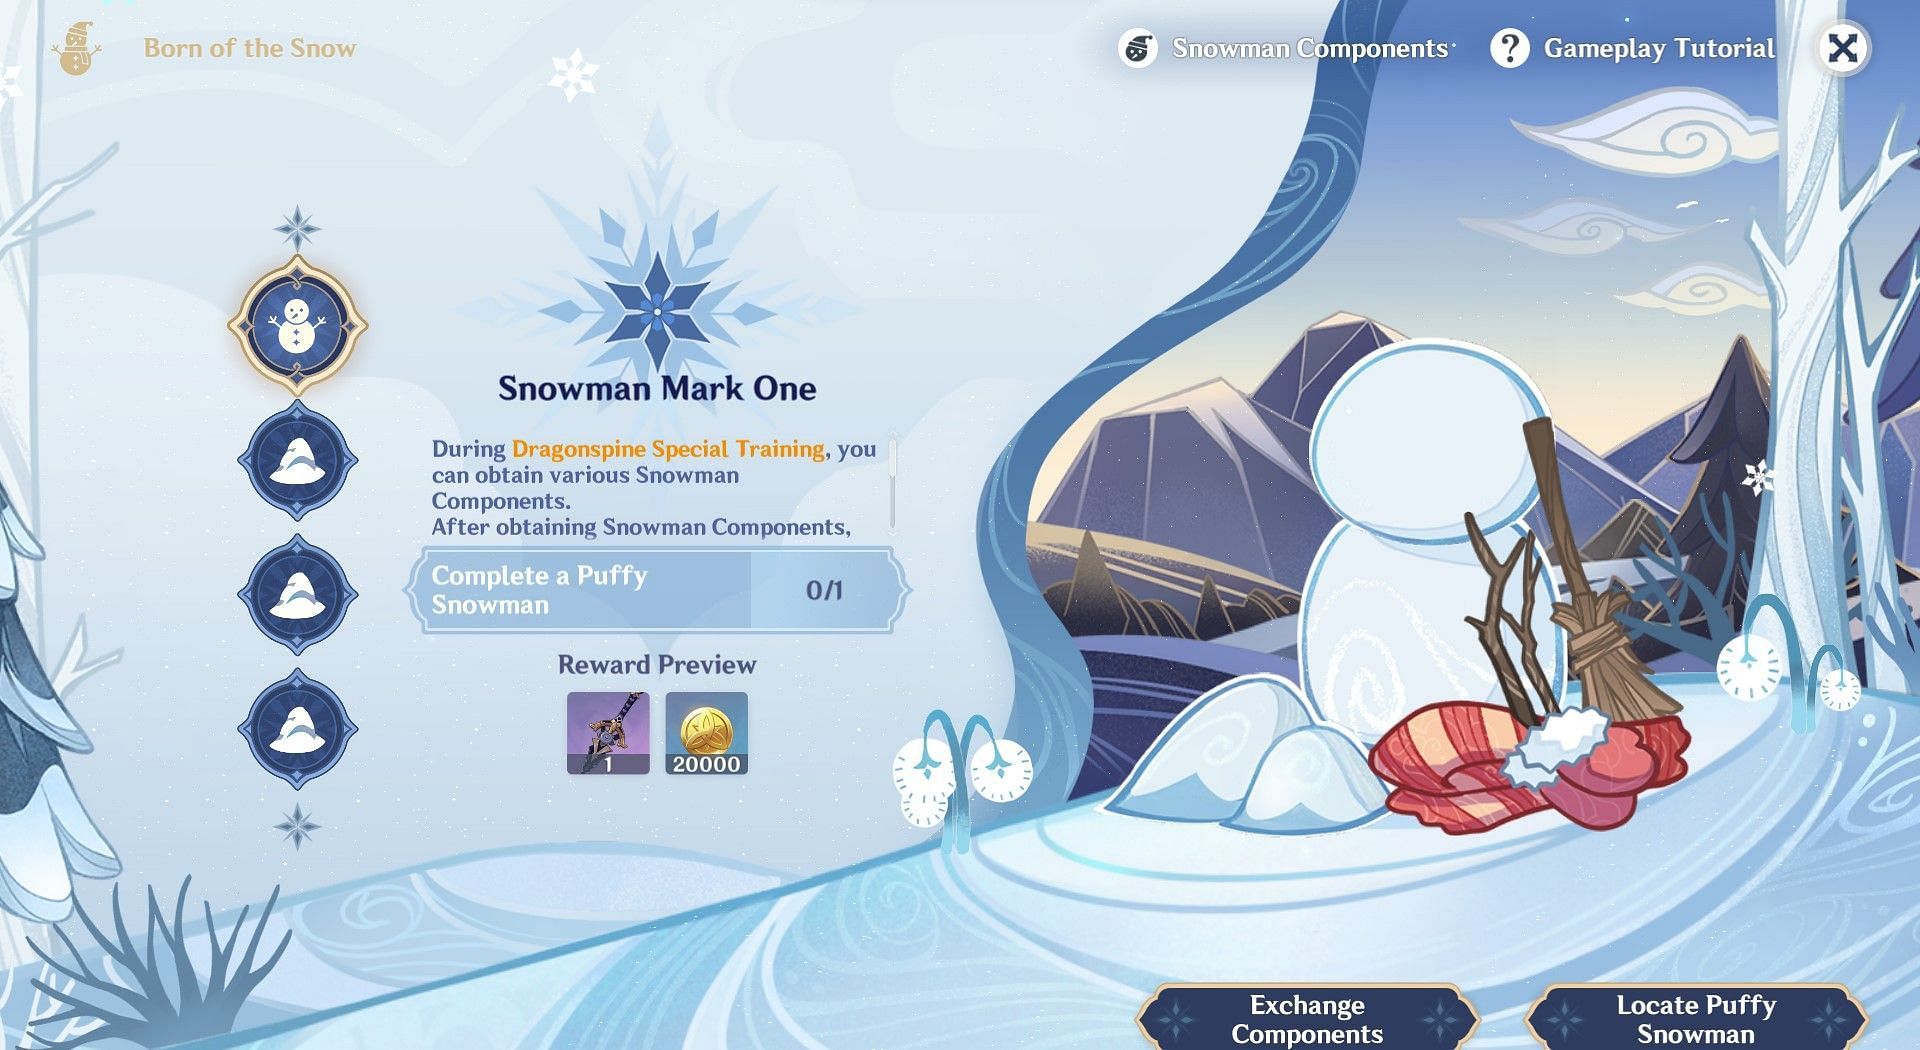 Cinnabar Spindle can be obtained as a reward for making a Puffy Snowman (Image via Genshin Impact)